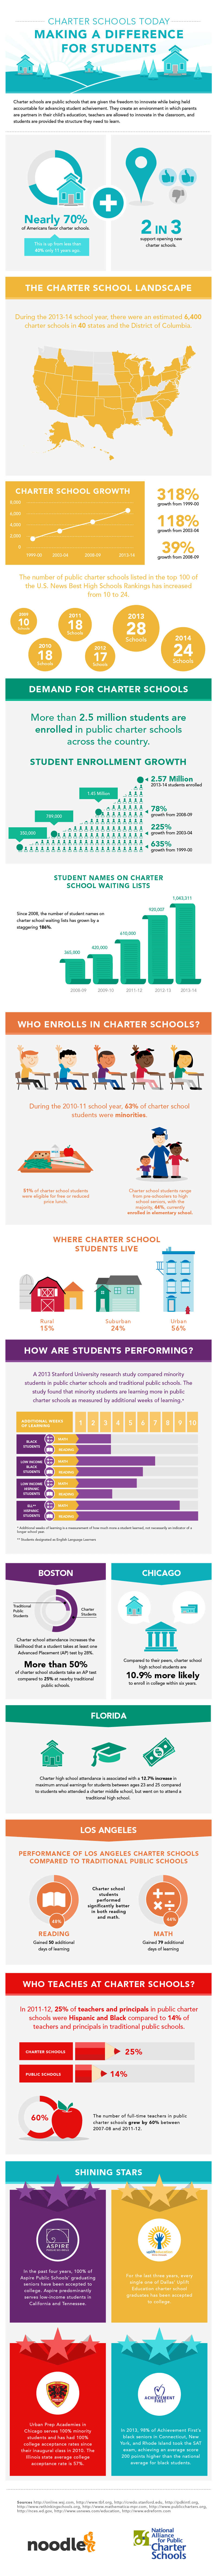 The Charter Schools Infographic